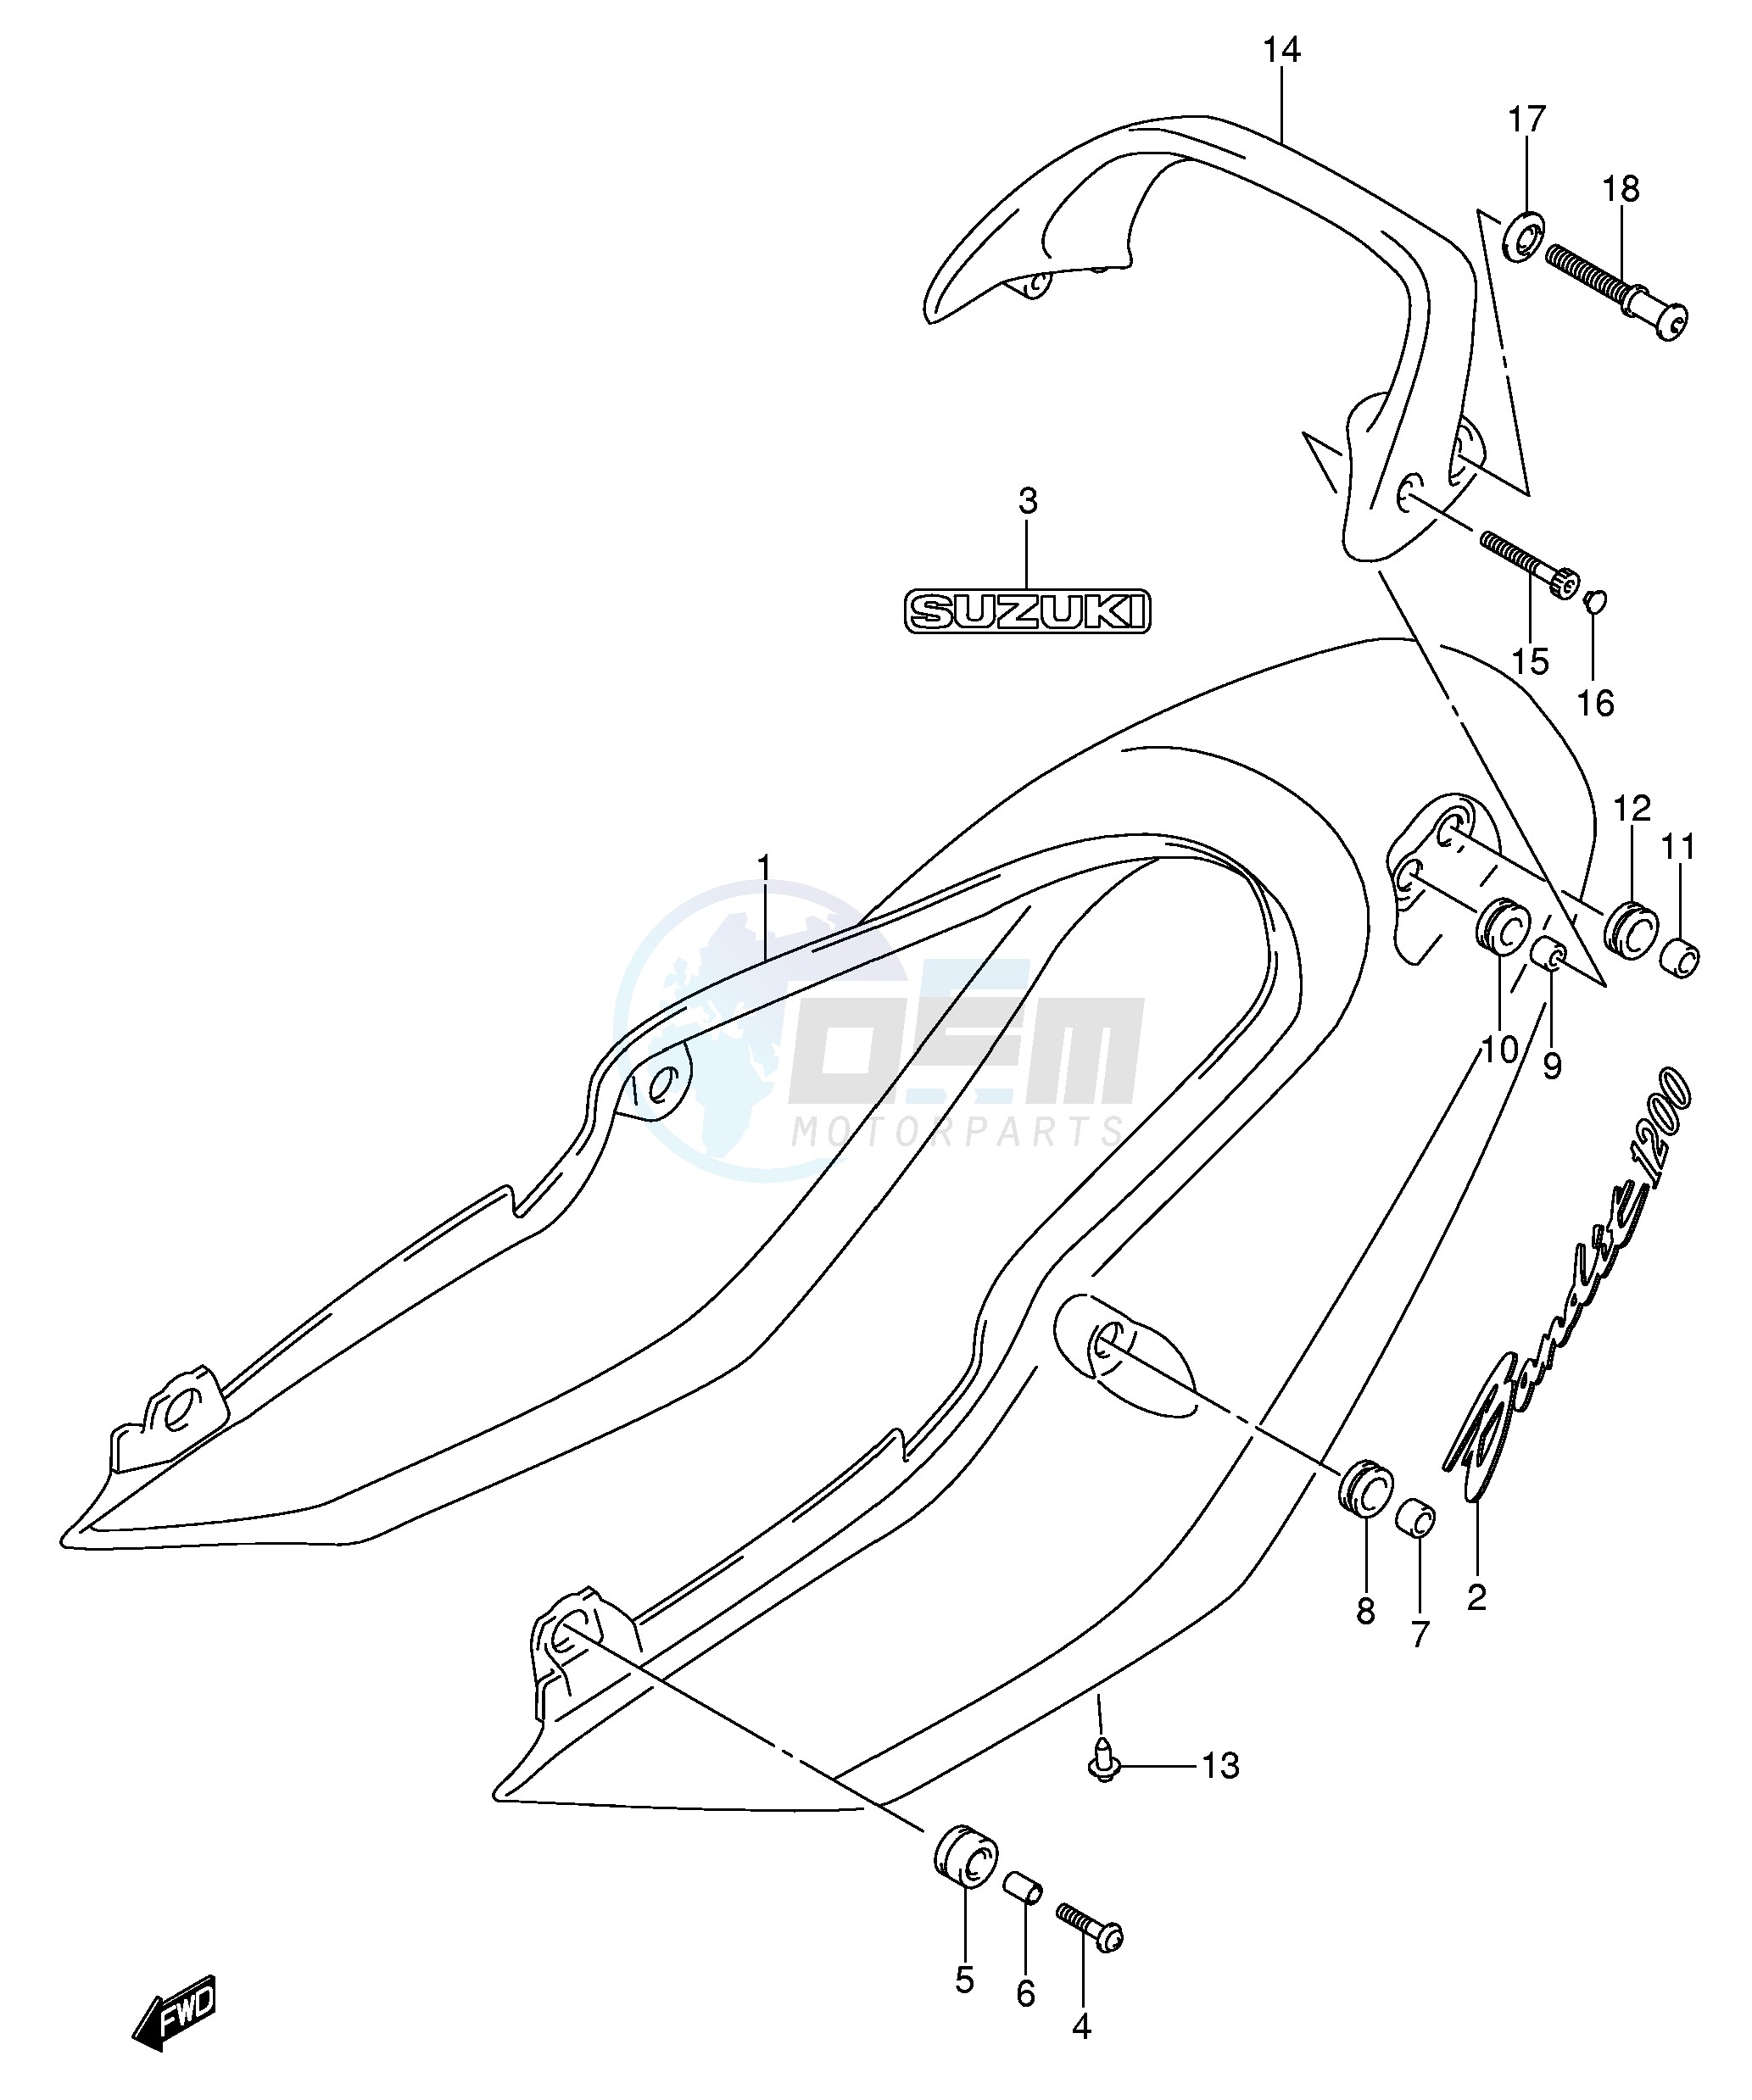 SEAT TAIL COVER (GSF1200K5) blueprint